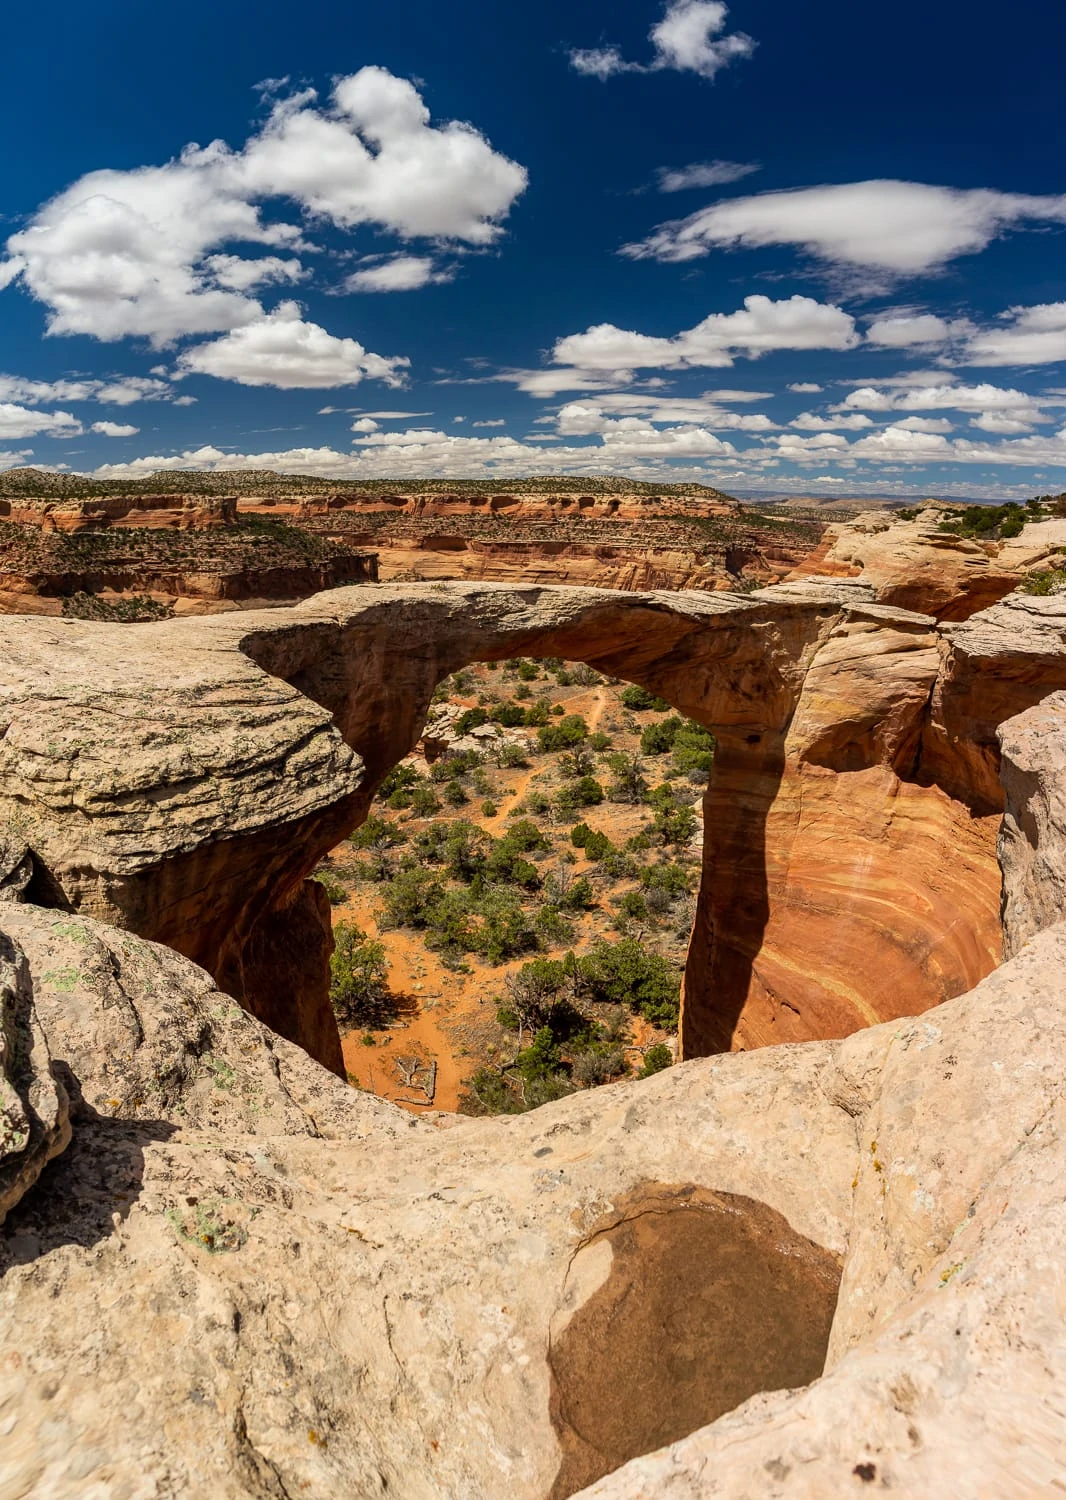 The rattlesnake arches in western colorado framed by the red walled canyon and blue sky with puffy white clouds.